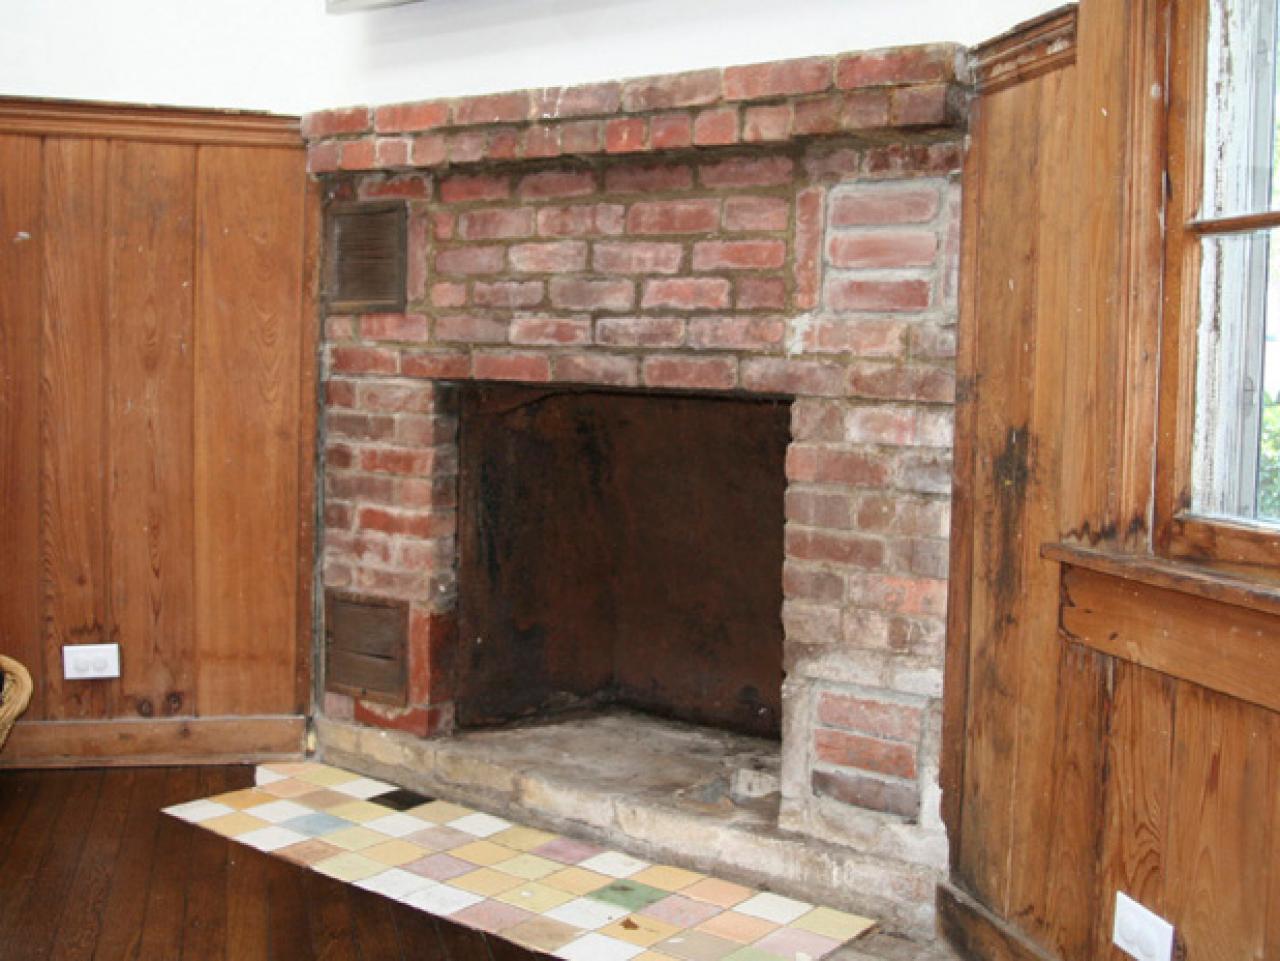 Brick Fireplace With Stone, How To Install Stone Tile Over Brick Fireplace